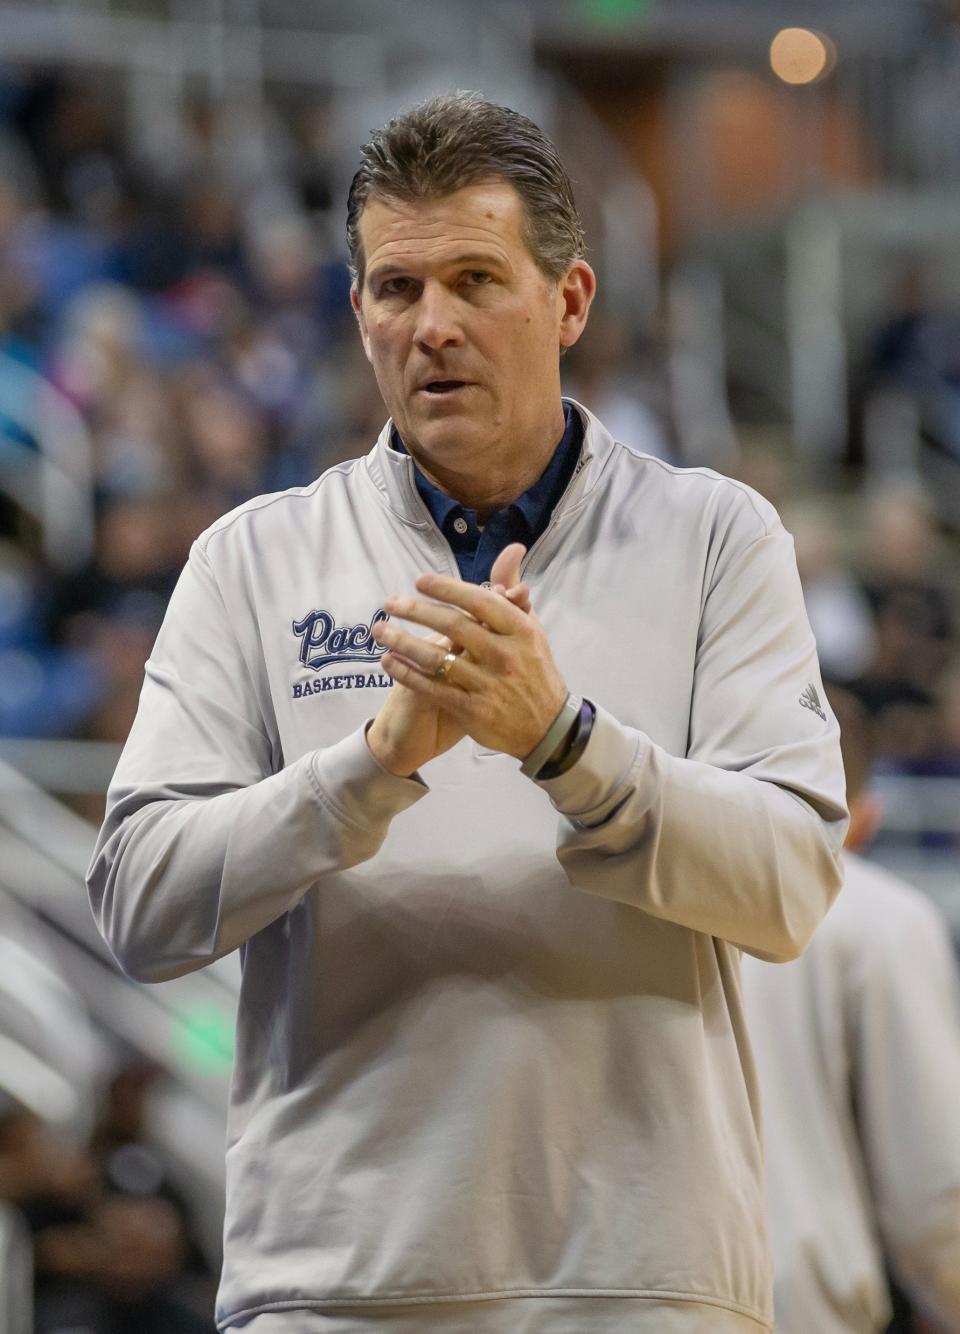 Nevada head coach Steve Alford on the sidelines against San Diego State during the second half of a basketball game played at Lawlor Events Center in Reno, Nev., Tuesday, Jan. 31, 2023